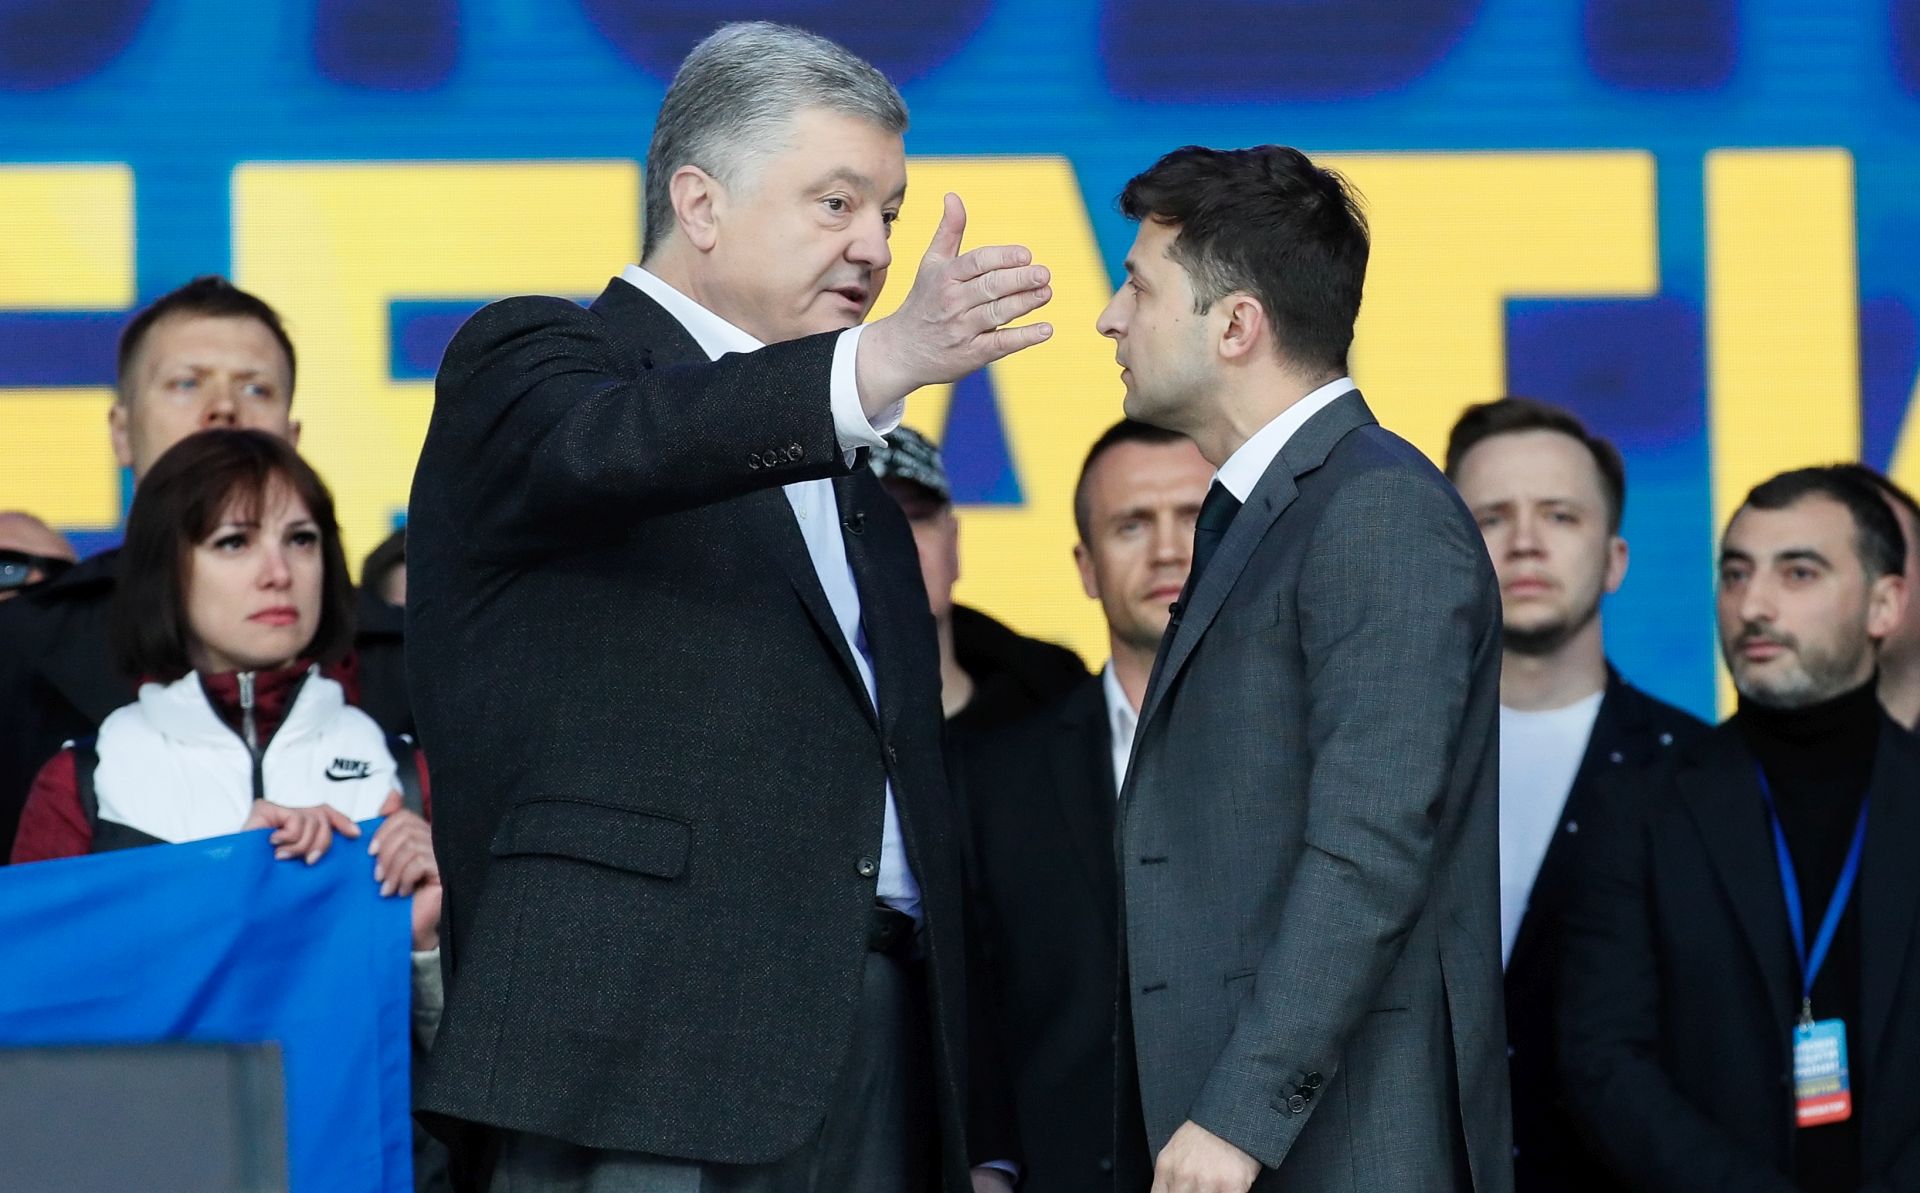 epa07516268 Ukrainian Presidential candidates Petro Poroshenko (L) and Volodymyr Zelensky (R) attend their debates at the Olimpiyskiy Stadium in Kiev, Ukraine, 19 April 2019.  Presidential candidates Petro Poroshenko and Volodymyr Zelensky visit the Olimpiyskiy Stadium to take part in the debates ahead of the second round of the presidential elections which will be held on 21 April 2019. After the first round of elections, showman Volodymyr Zelensky remains a frontrunner with 30.24 percent of votes and incumbent president Petro Poroshenko is a runner-up with 15.95 percent of votes.  EPA/SERGEY DOLZHENKO